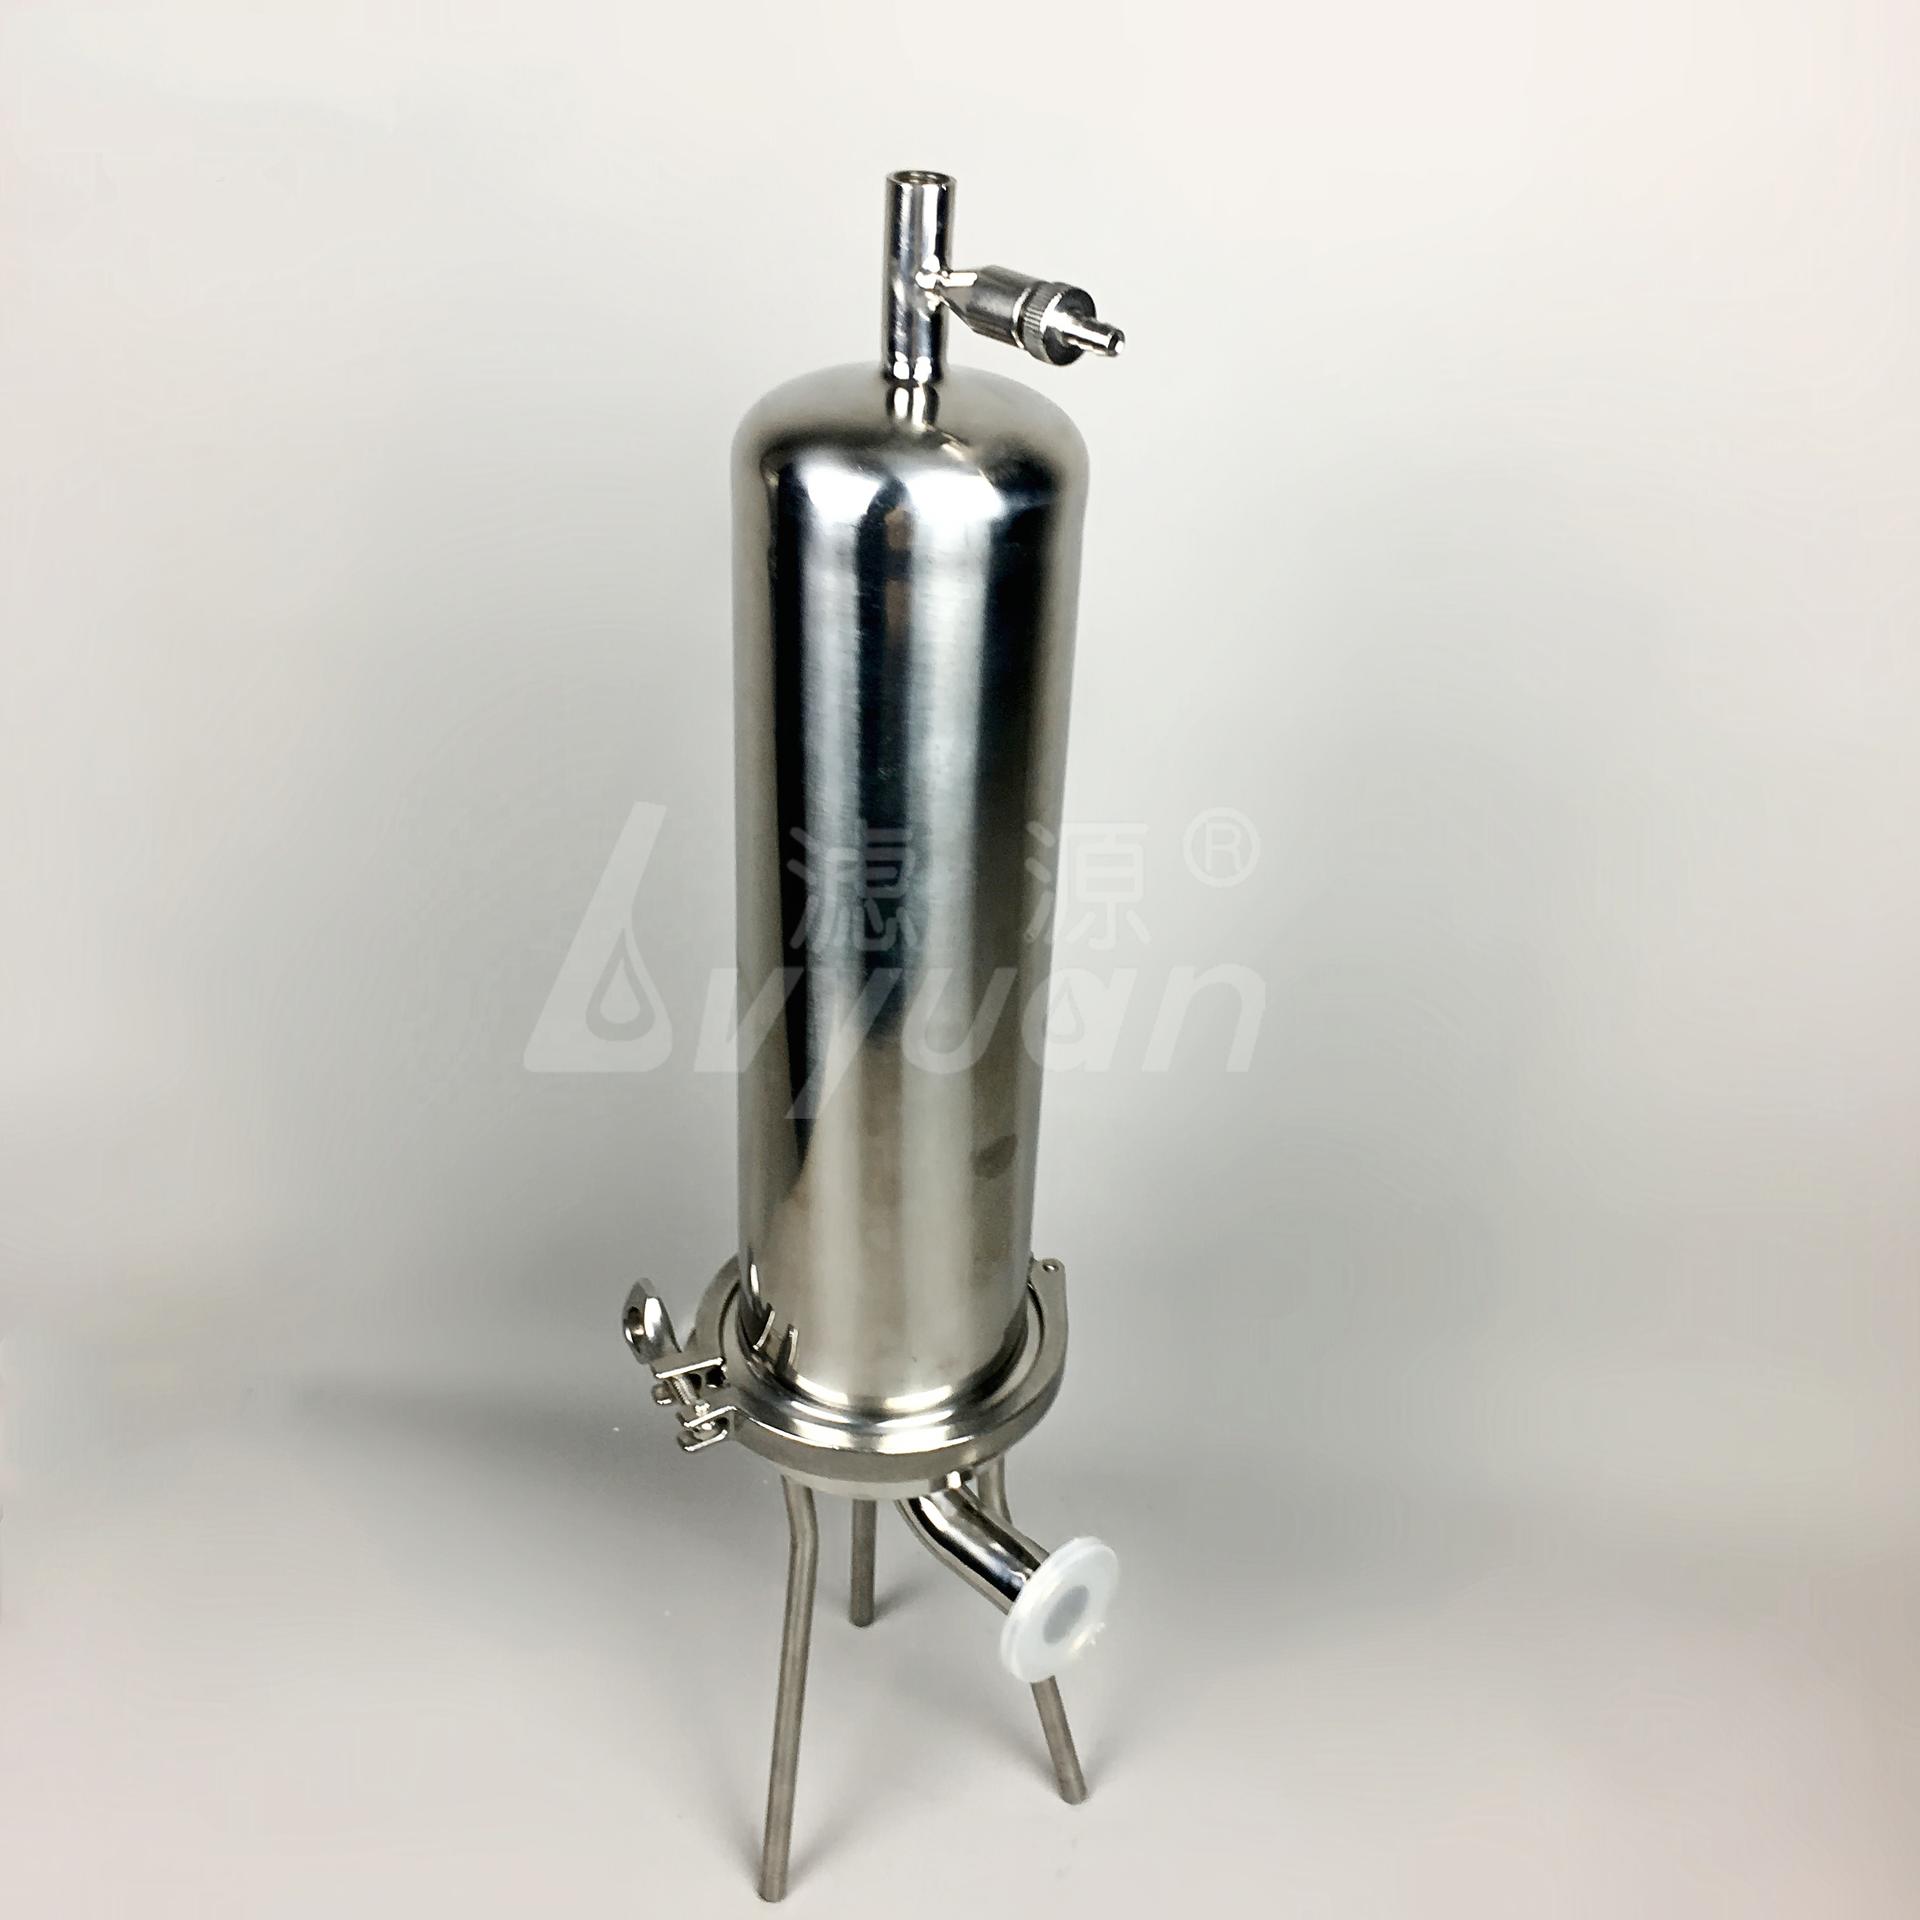 Single Cartridge Water Filter stainless Steel 304 ss316 Material Housing 20 inch